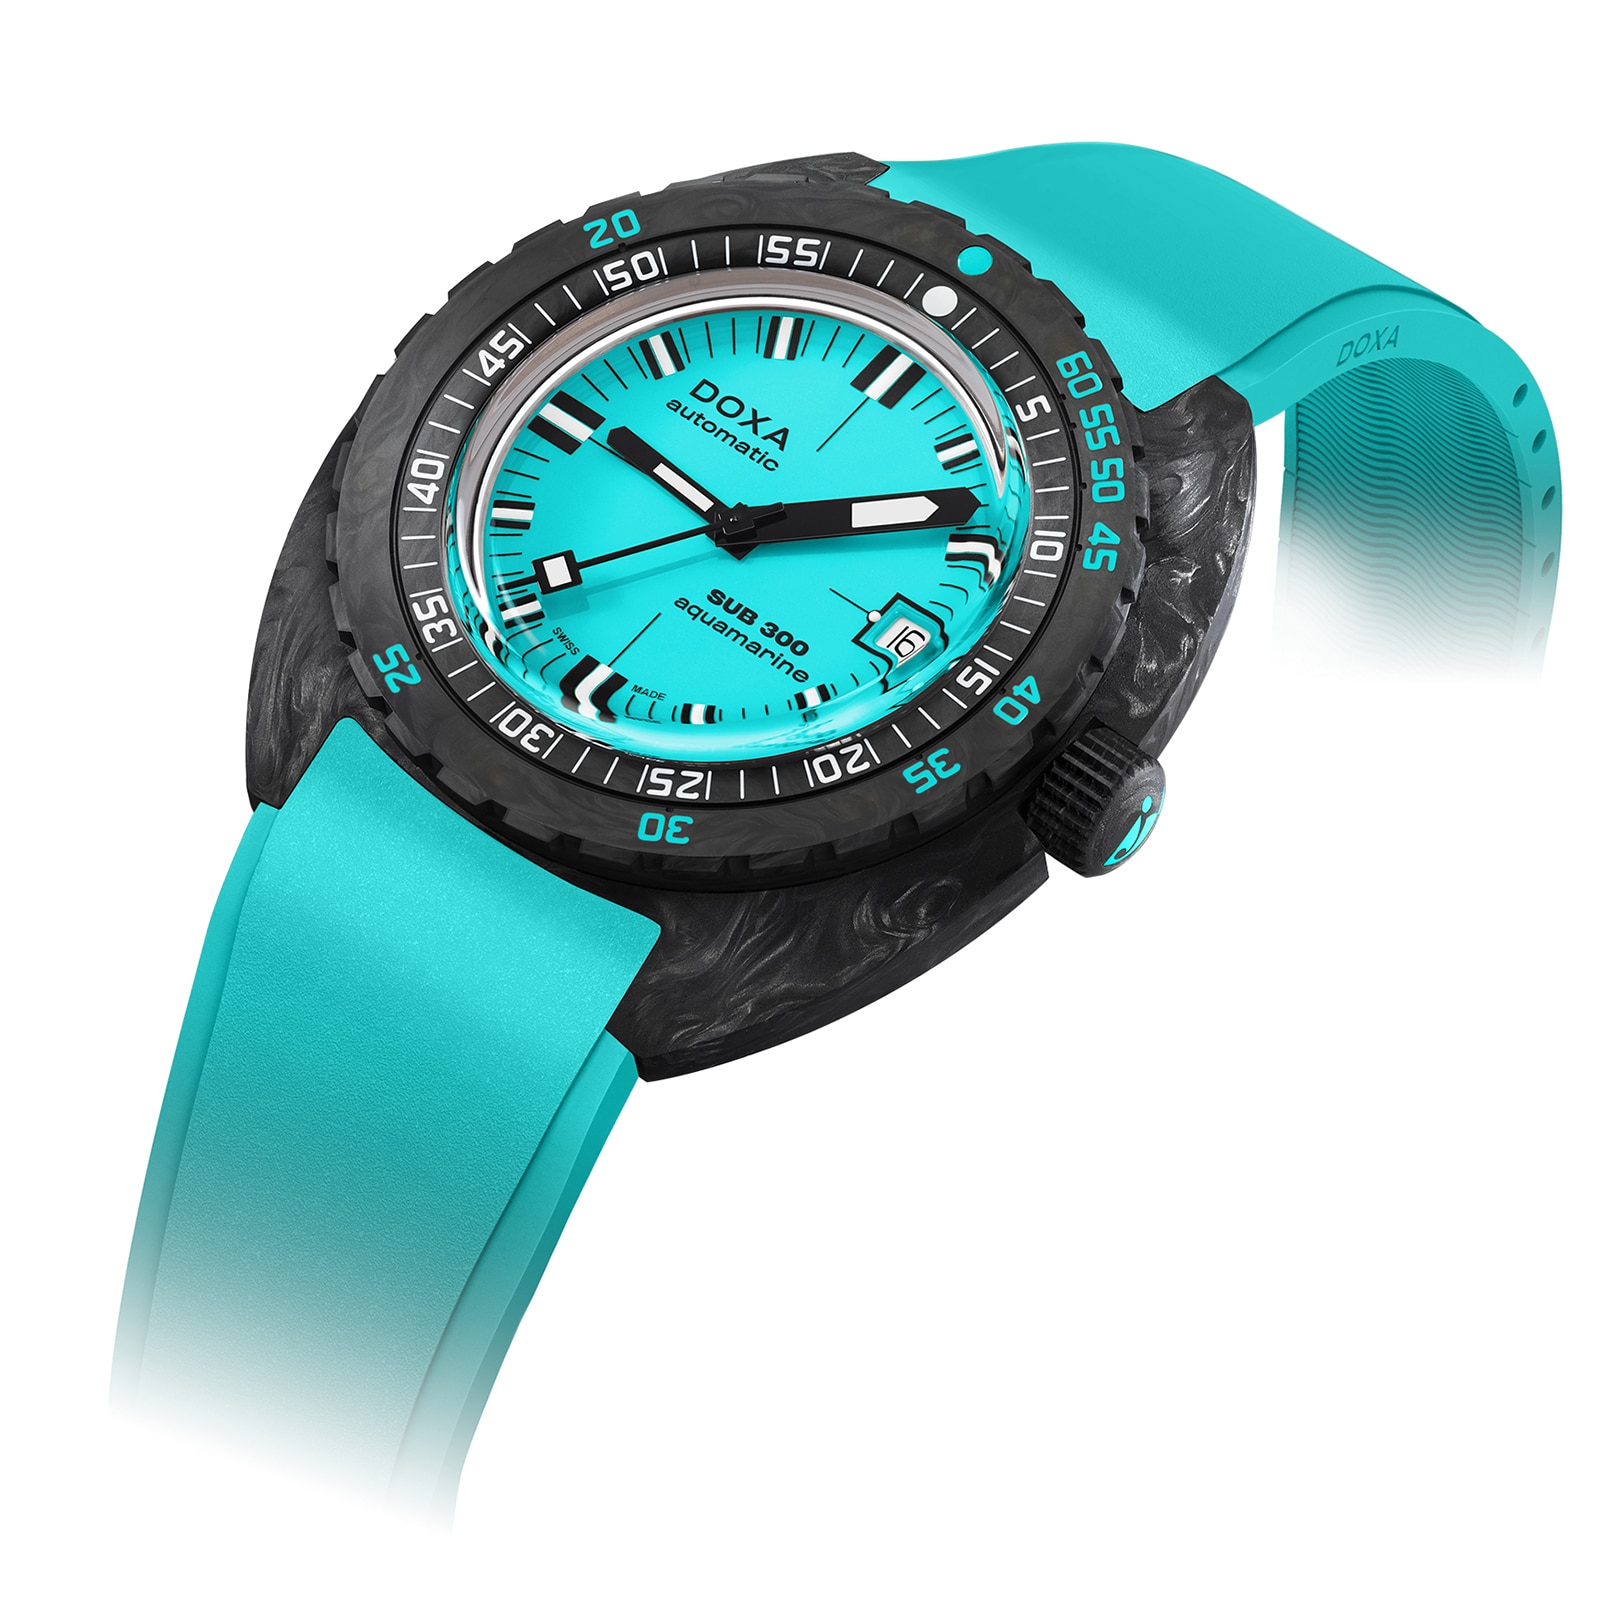 Doxa Watches Appoints The Blue Company As UK Distributor